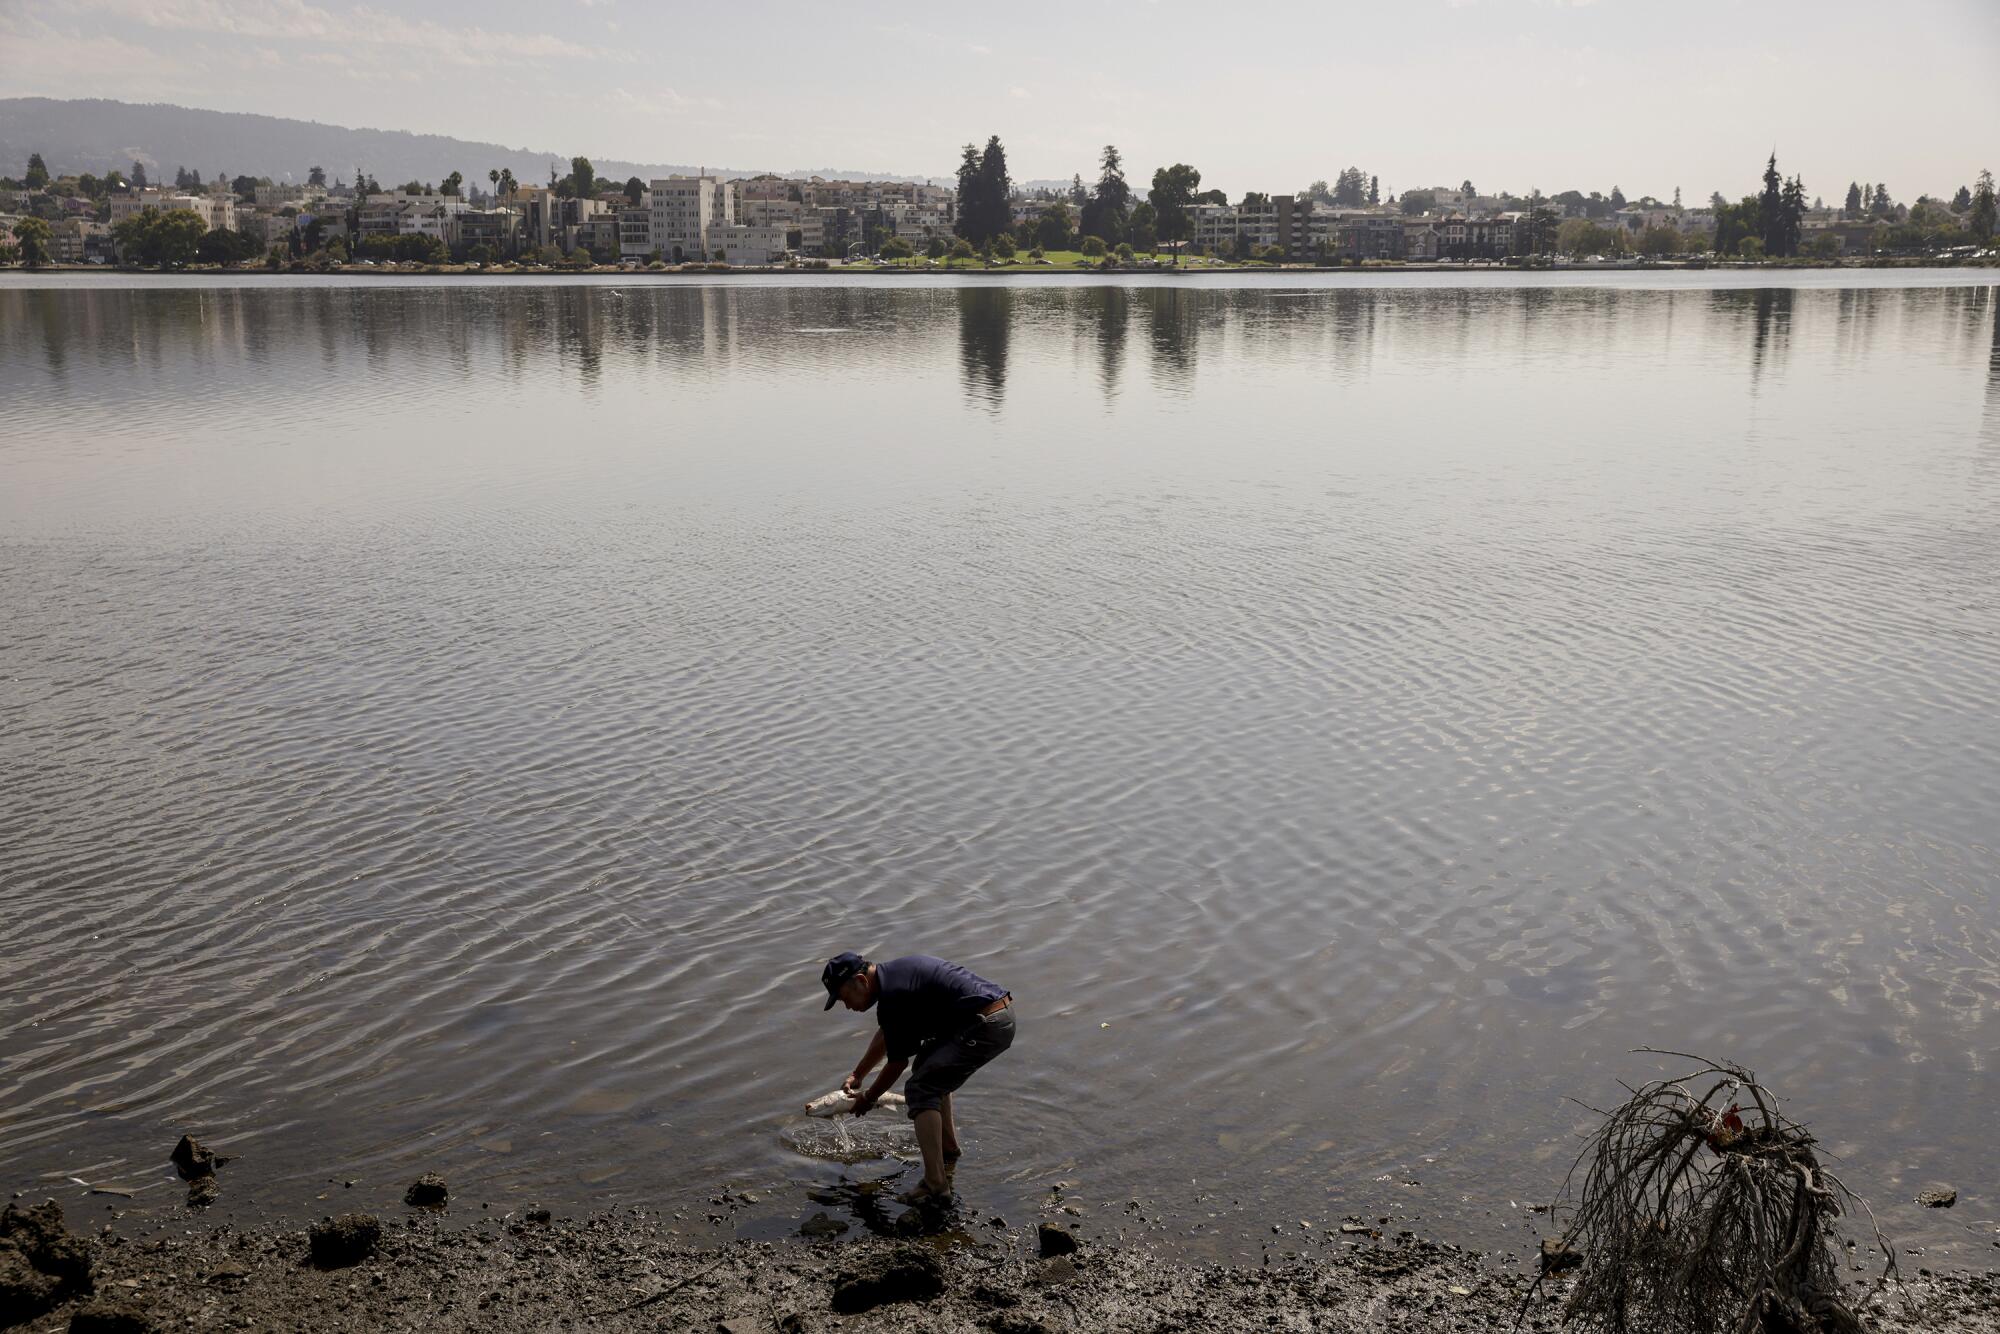 A man picks up a dead fish, likely killed by a toxic algae bloom, in Lake Merritt in Oakland.